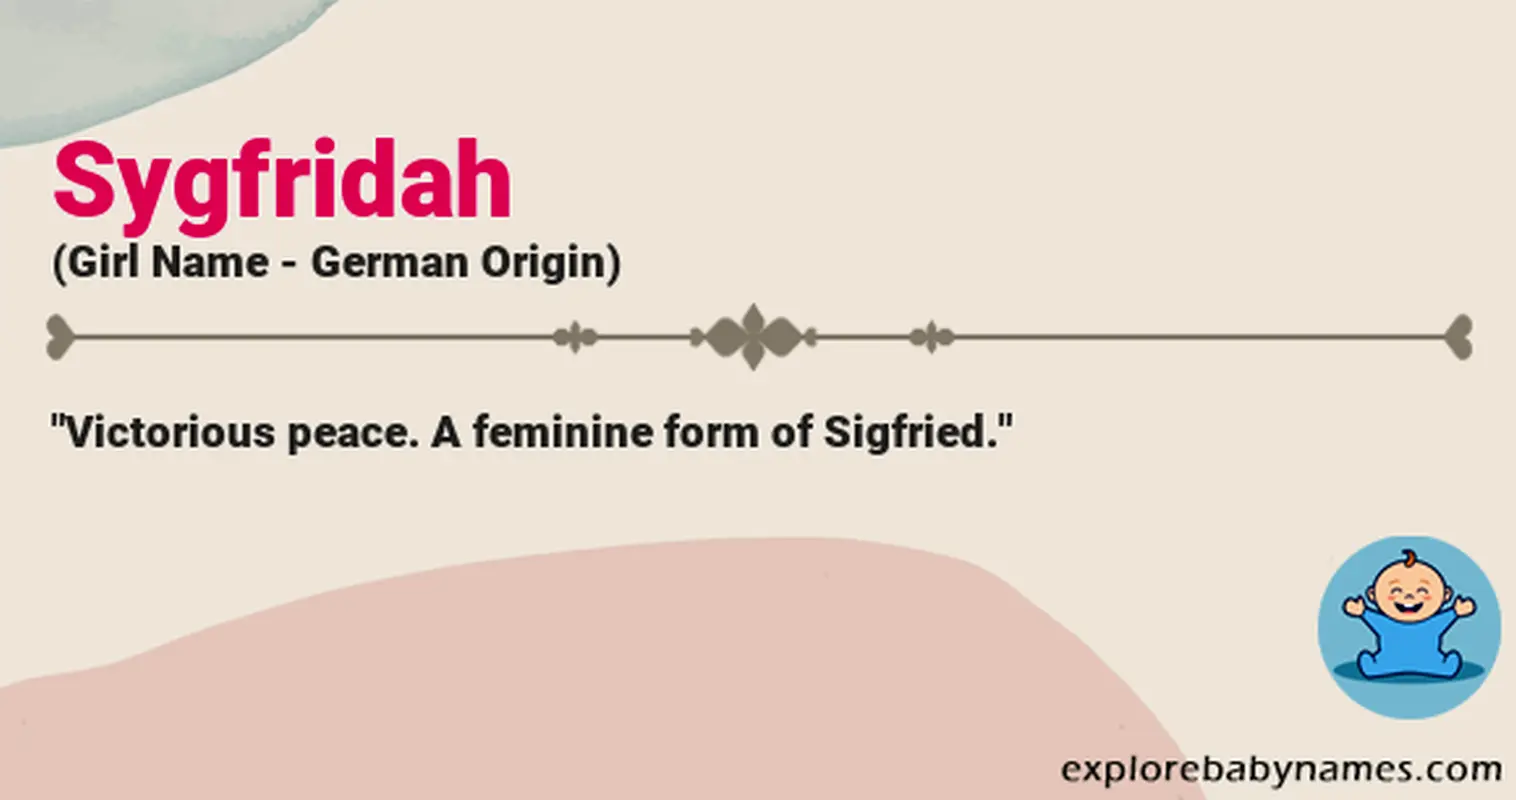 Meaning of Sygfridah